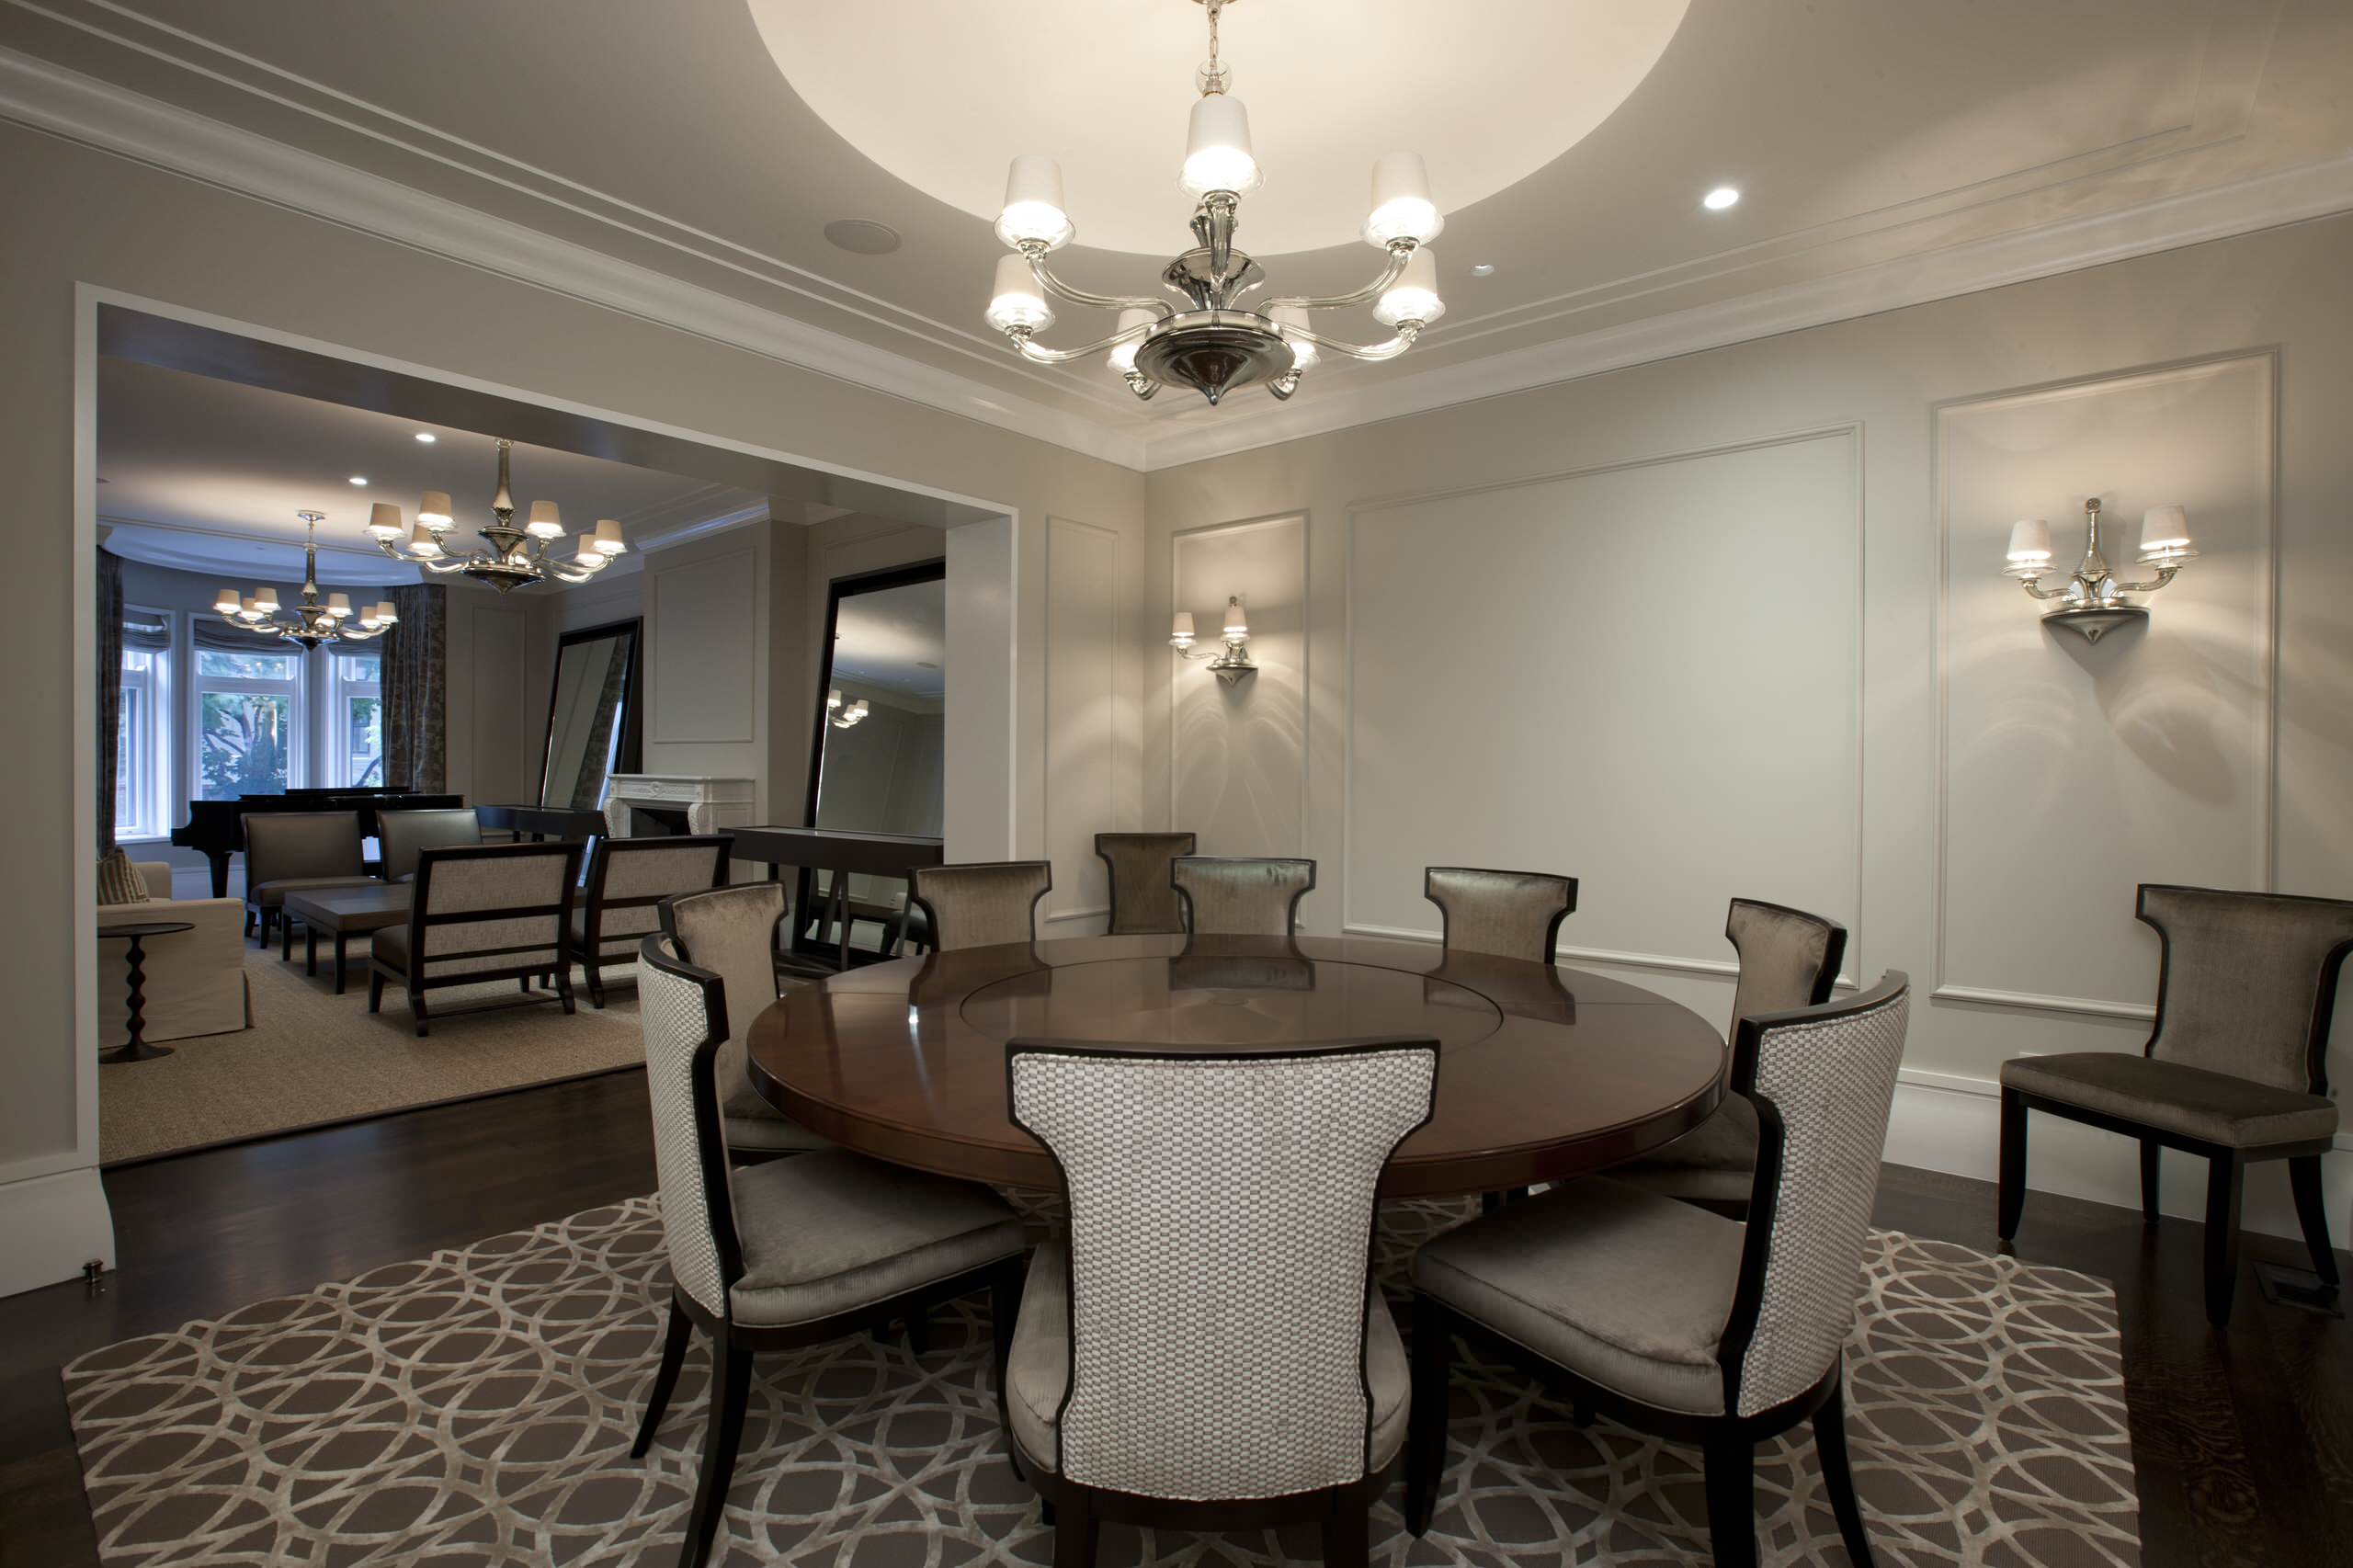 70 Inch Round Table Ideas Photos Houzz, How Big Is A 70 Inch Round Table